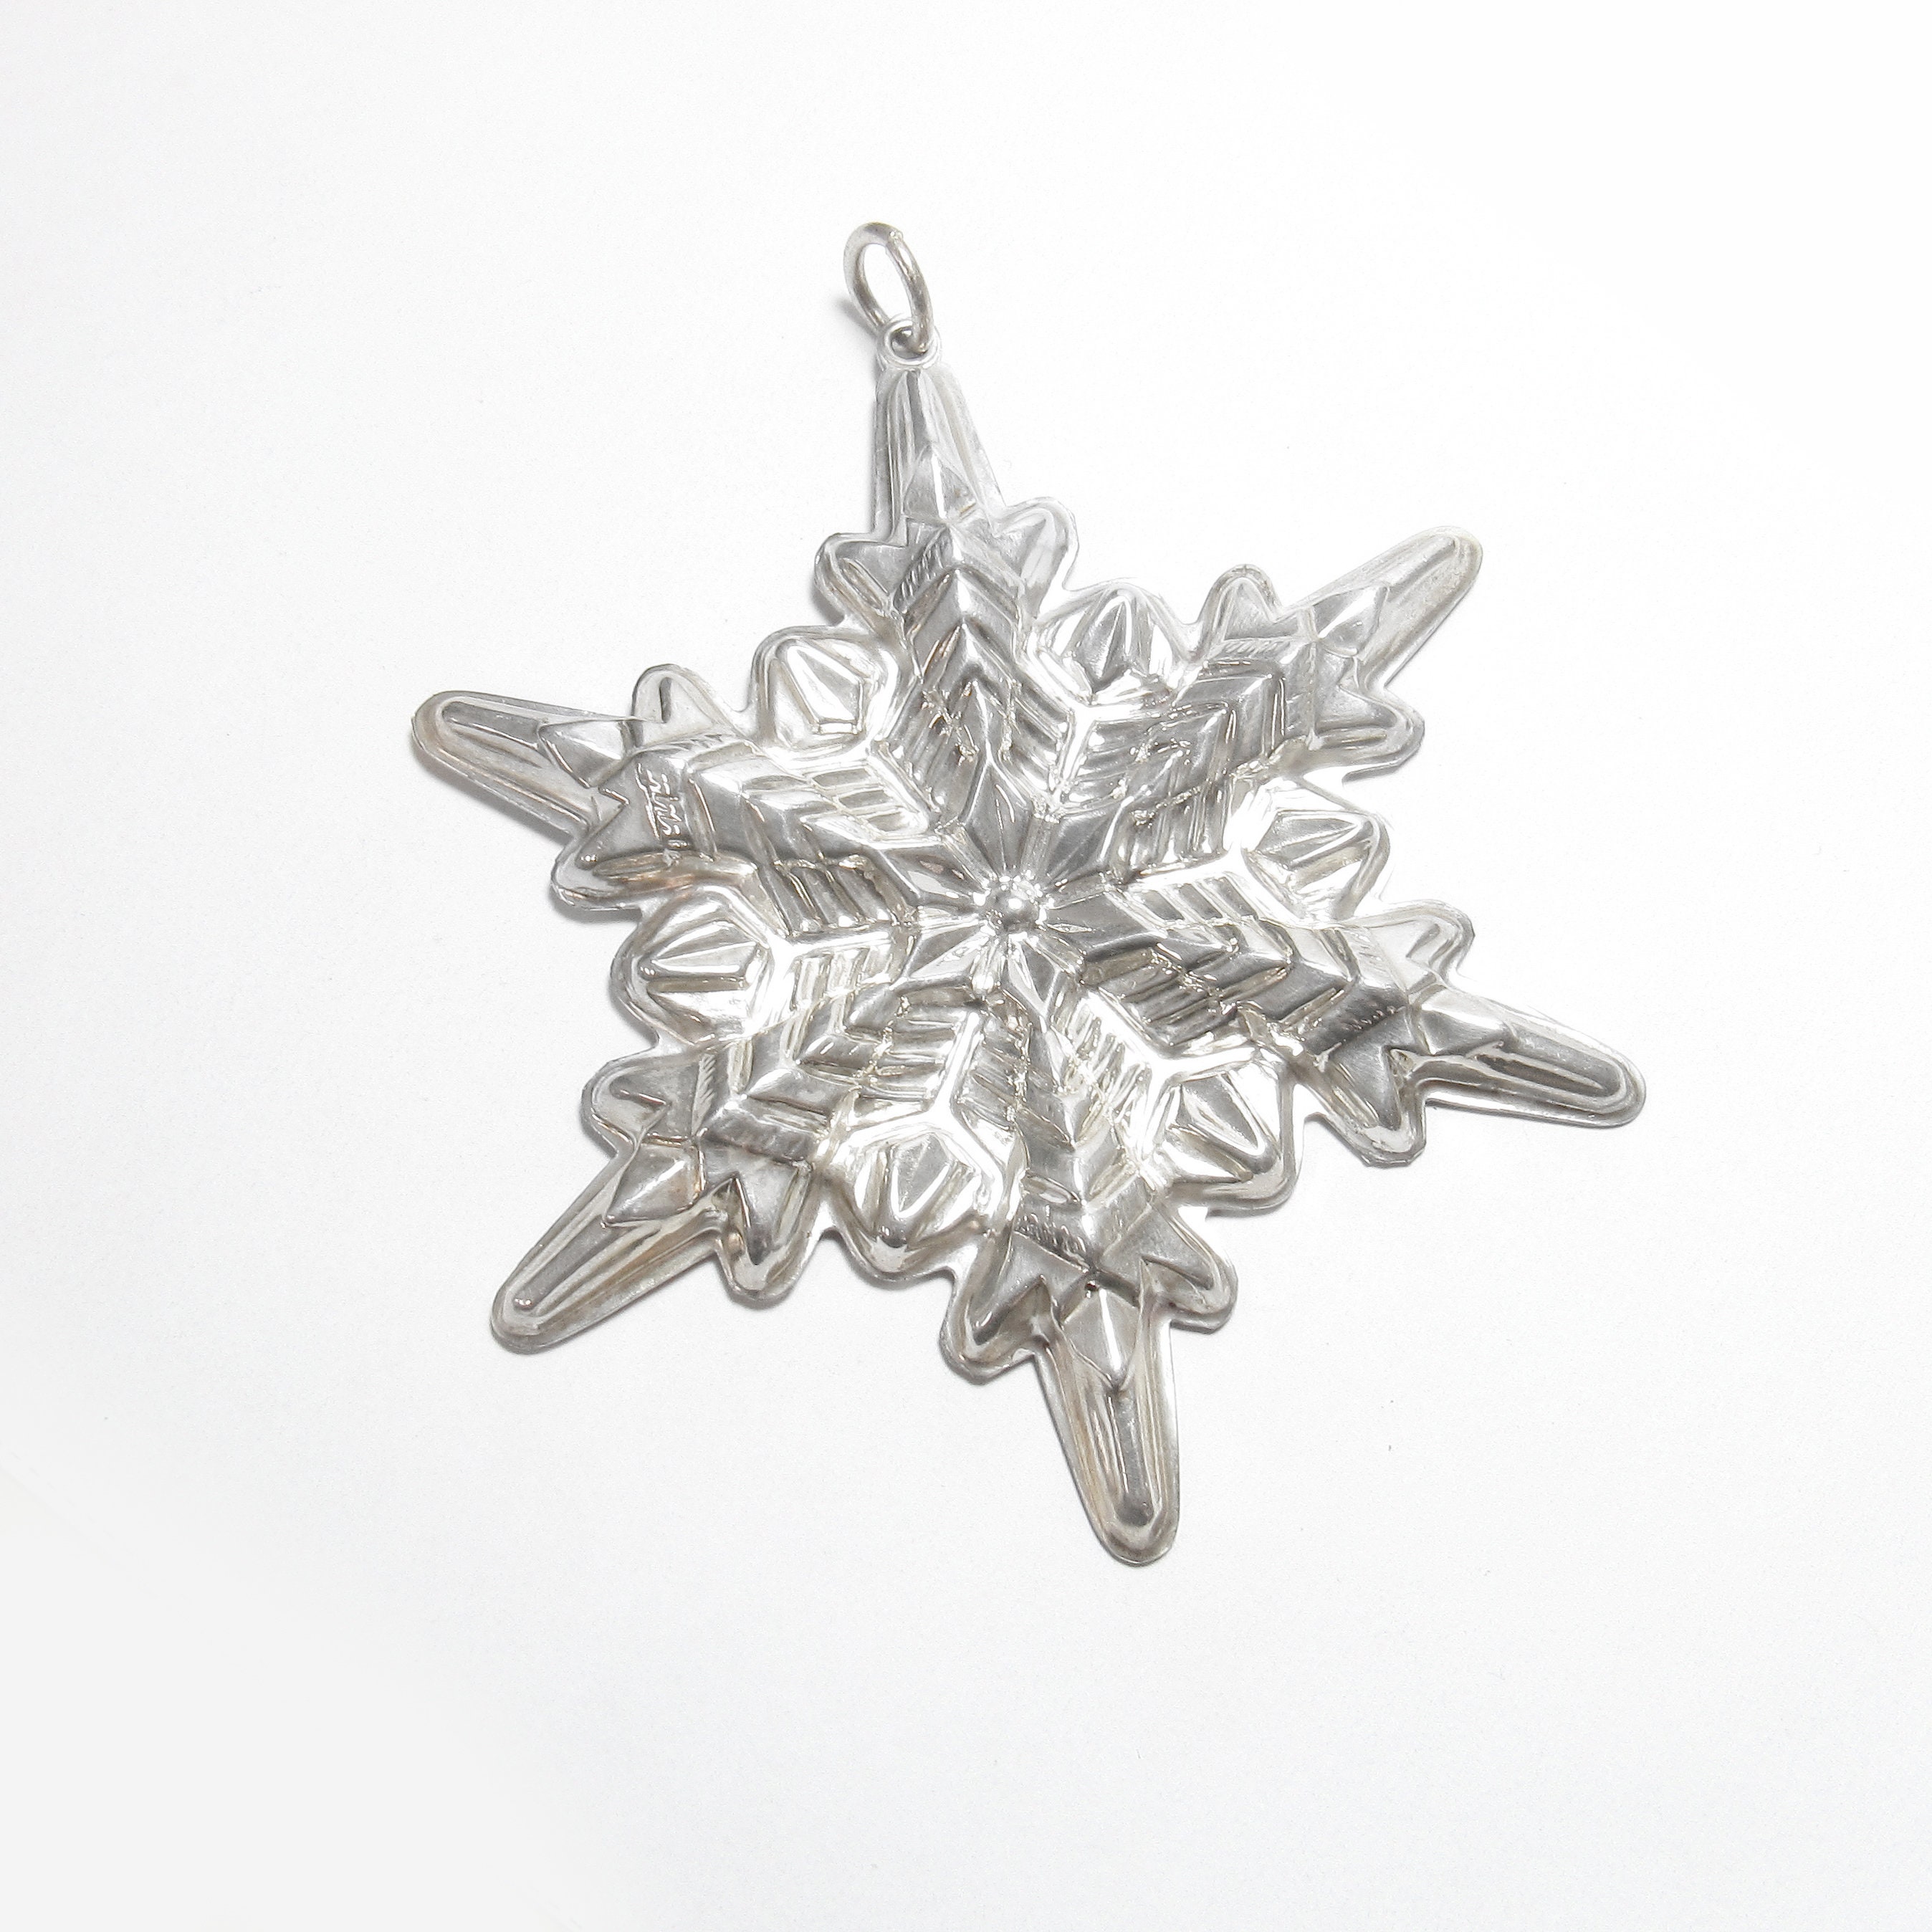 Lot 330: 34 Gorham Sterling Silver Snowflakes